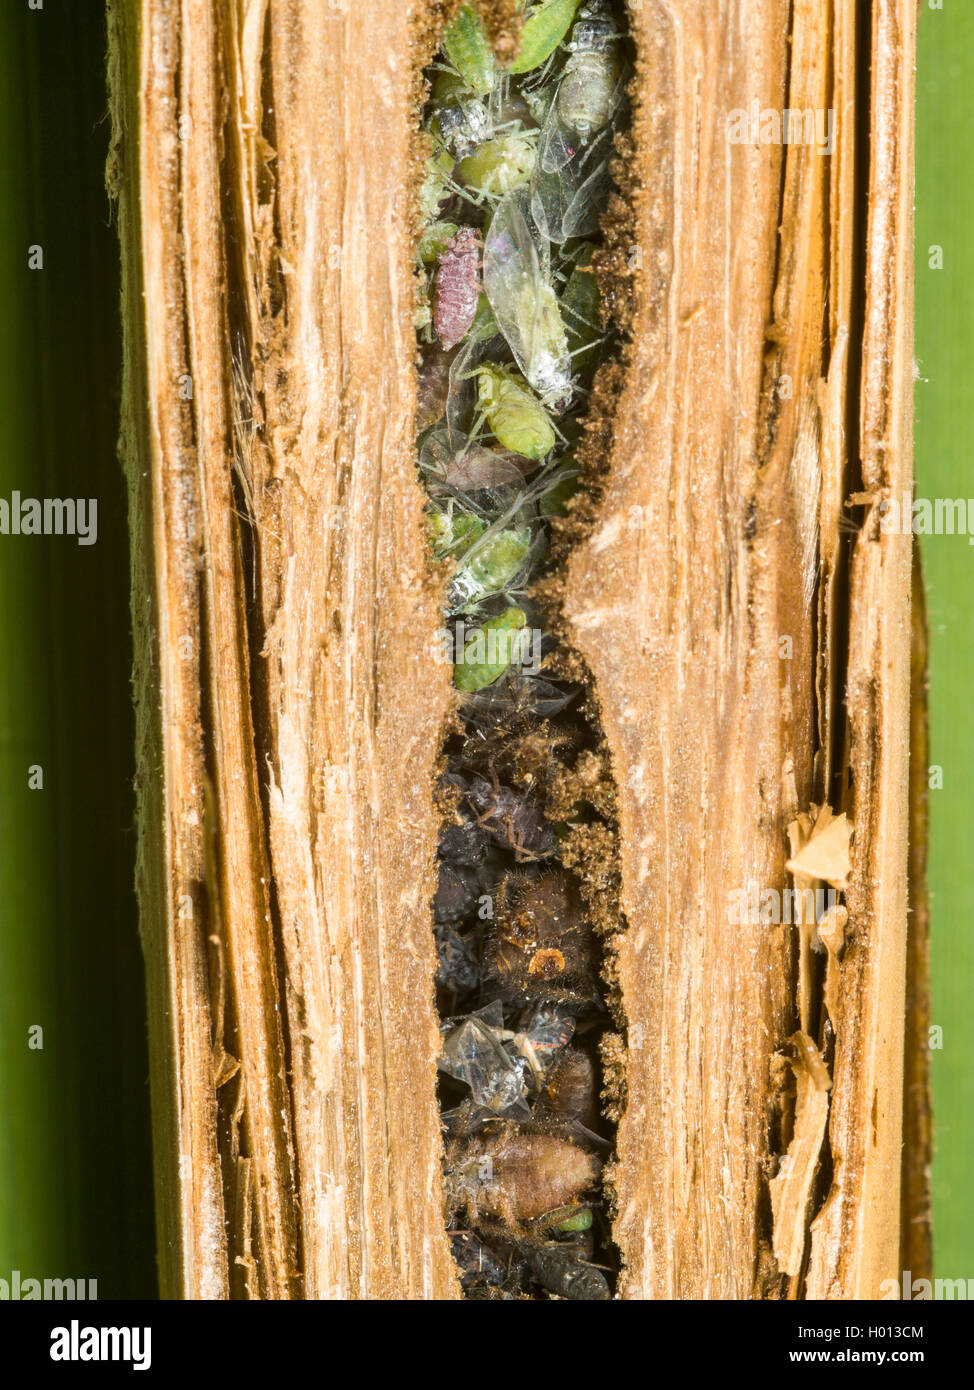 Digger Wasp (Pemphredon lethifer), Captured Aphids in the nest - the gall from Lipara lucens in Common Reed (Phragmites australis), Germany Stock Photo